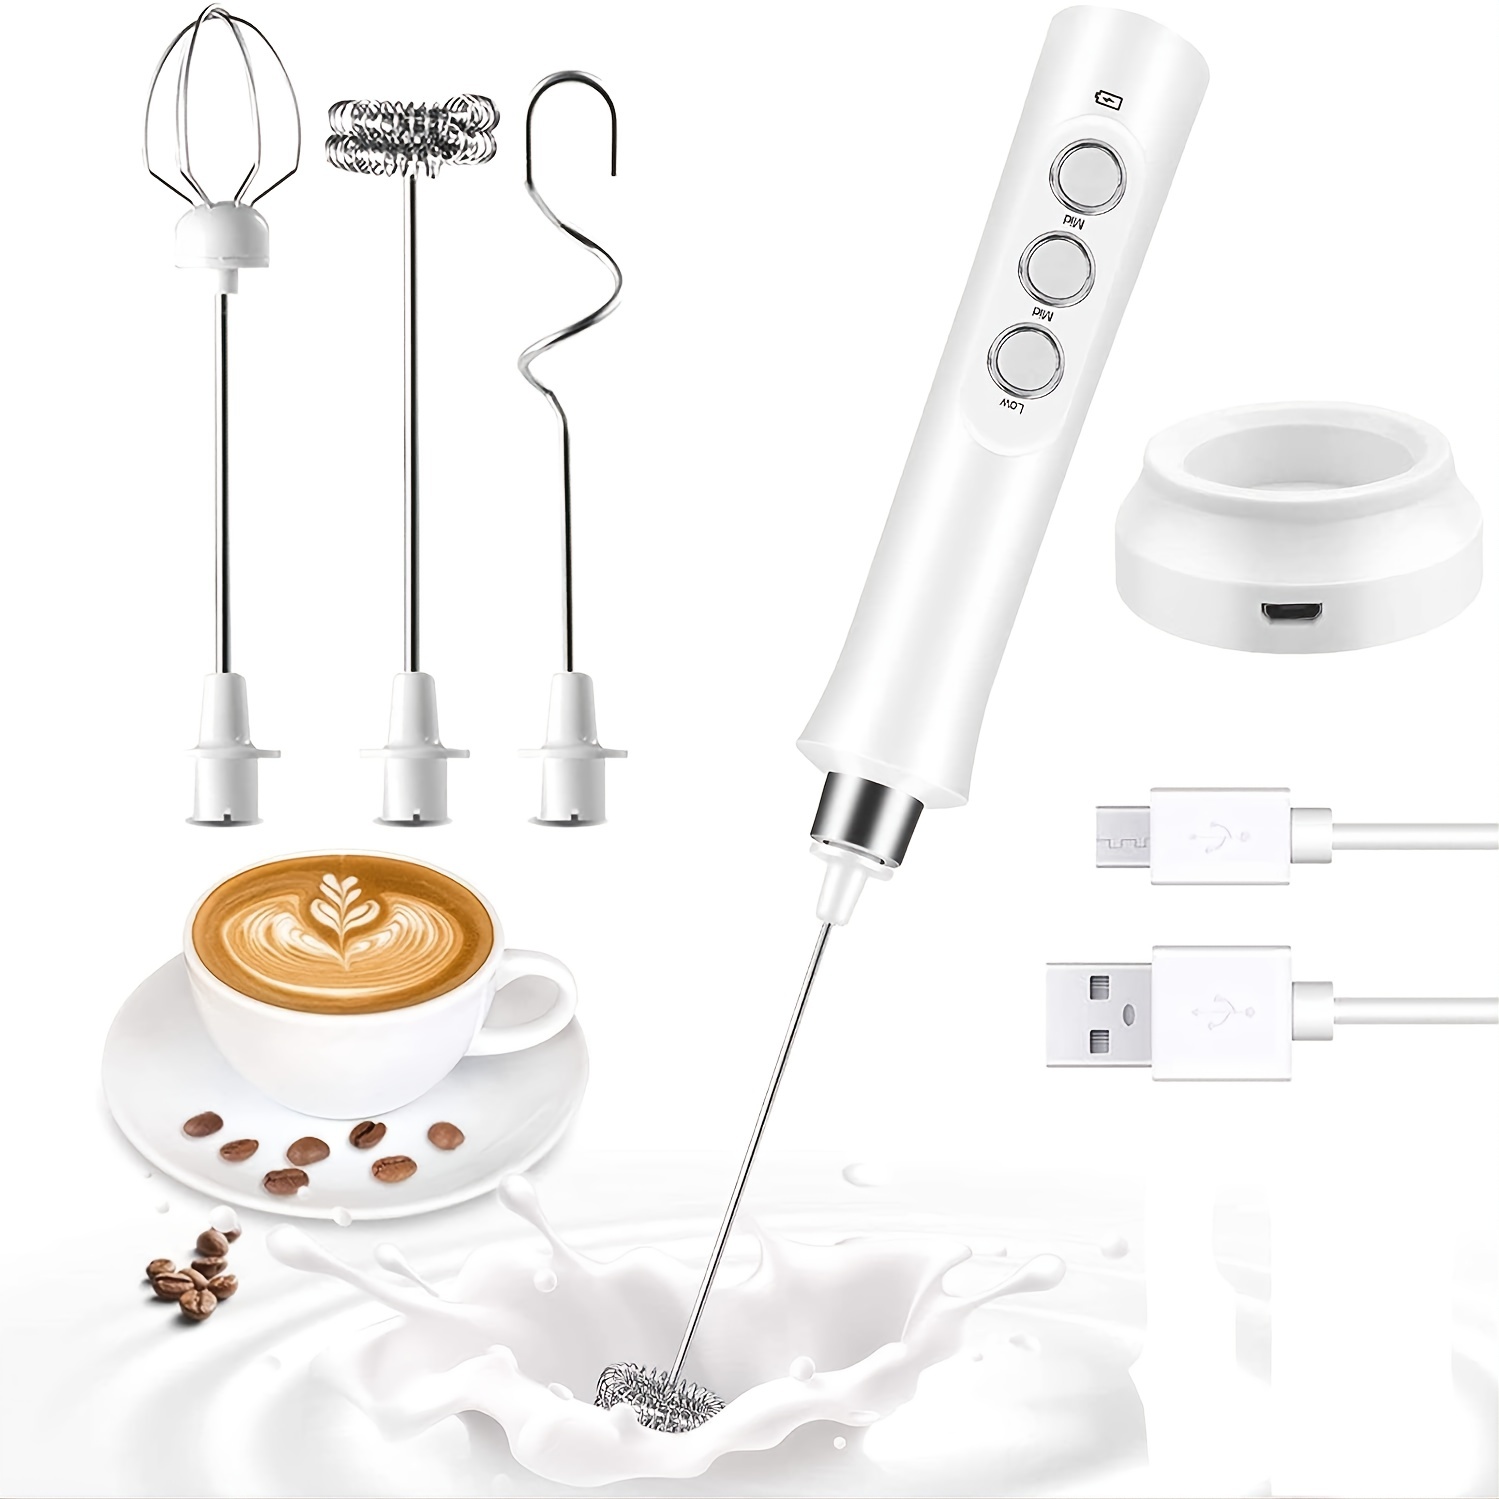 Rechargeable Milk Frother Mixer, Pitcher and Charging Base - 3 Speed  Frother Handheld for Latte, Drinks and Matcha - Includes Cup, Frother for  Coffee